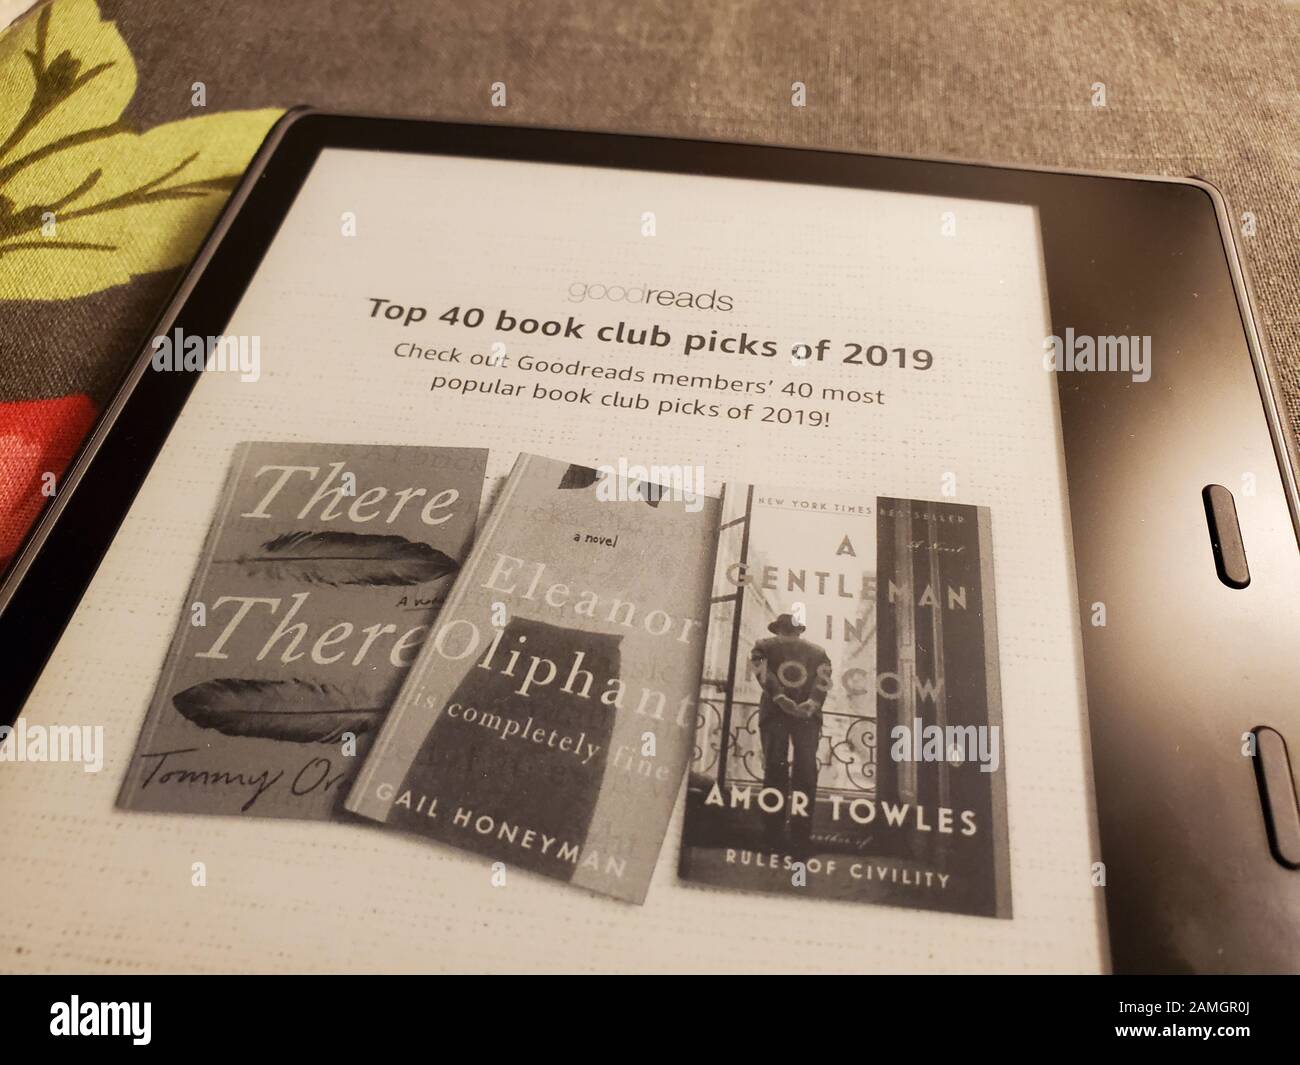 Close-up of latest generation Amazon Kindle Oasis e book reader with leather cover on floral print fabric, San Ramon, California, January 2, 2020. () Stock Photo